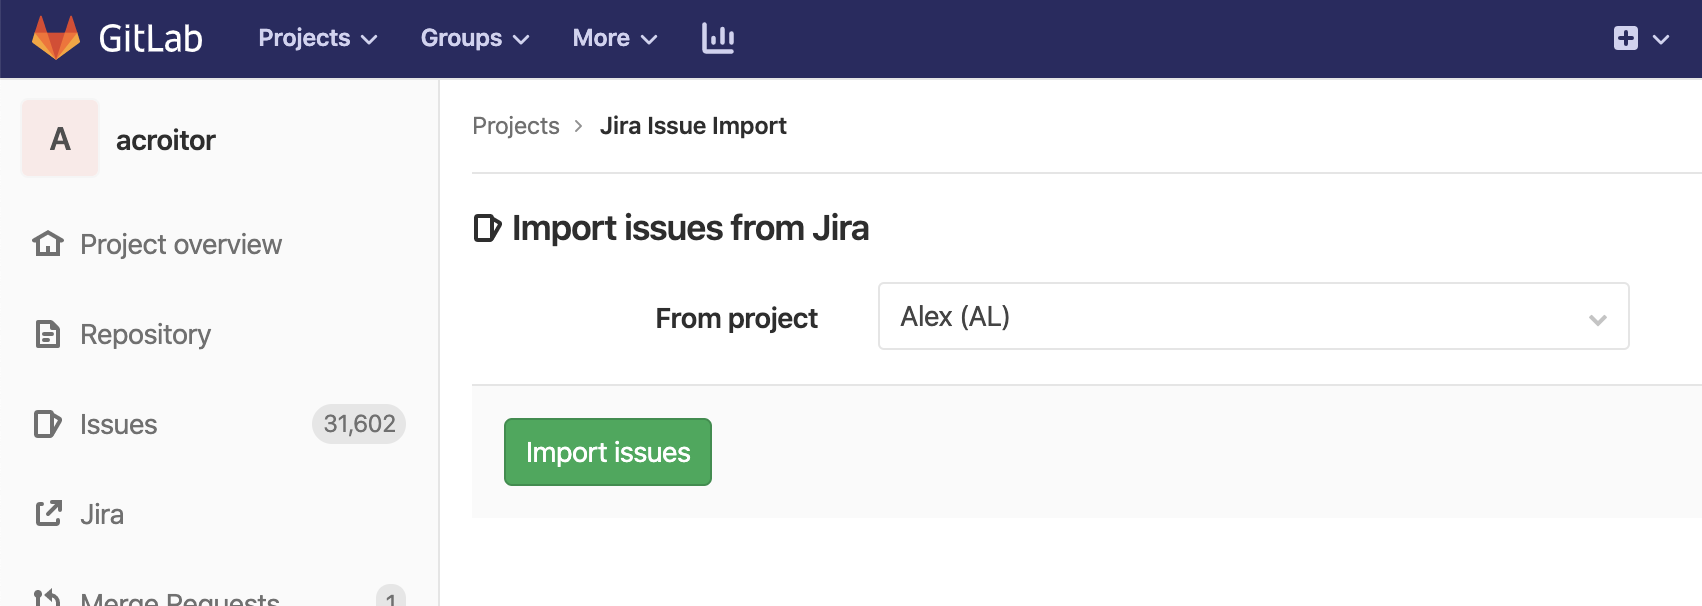 doc/user/project/import/img/jira/import_issues_from_jira_form_v12_10.png